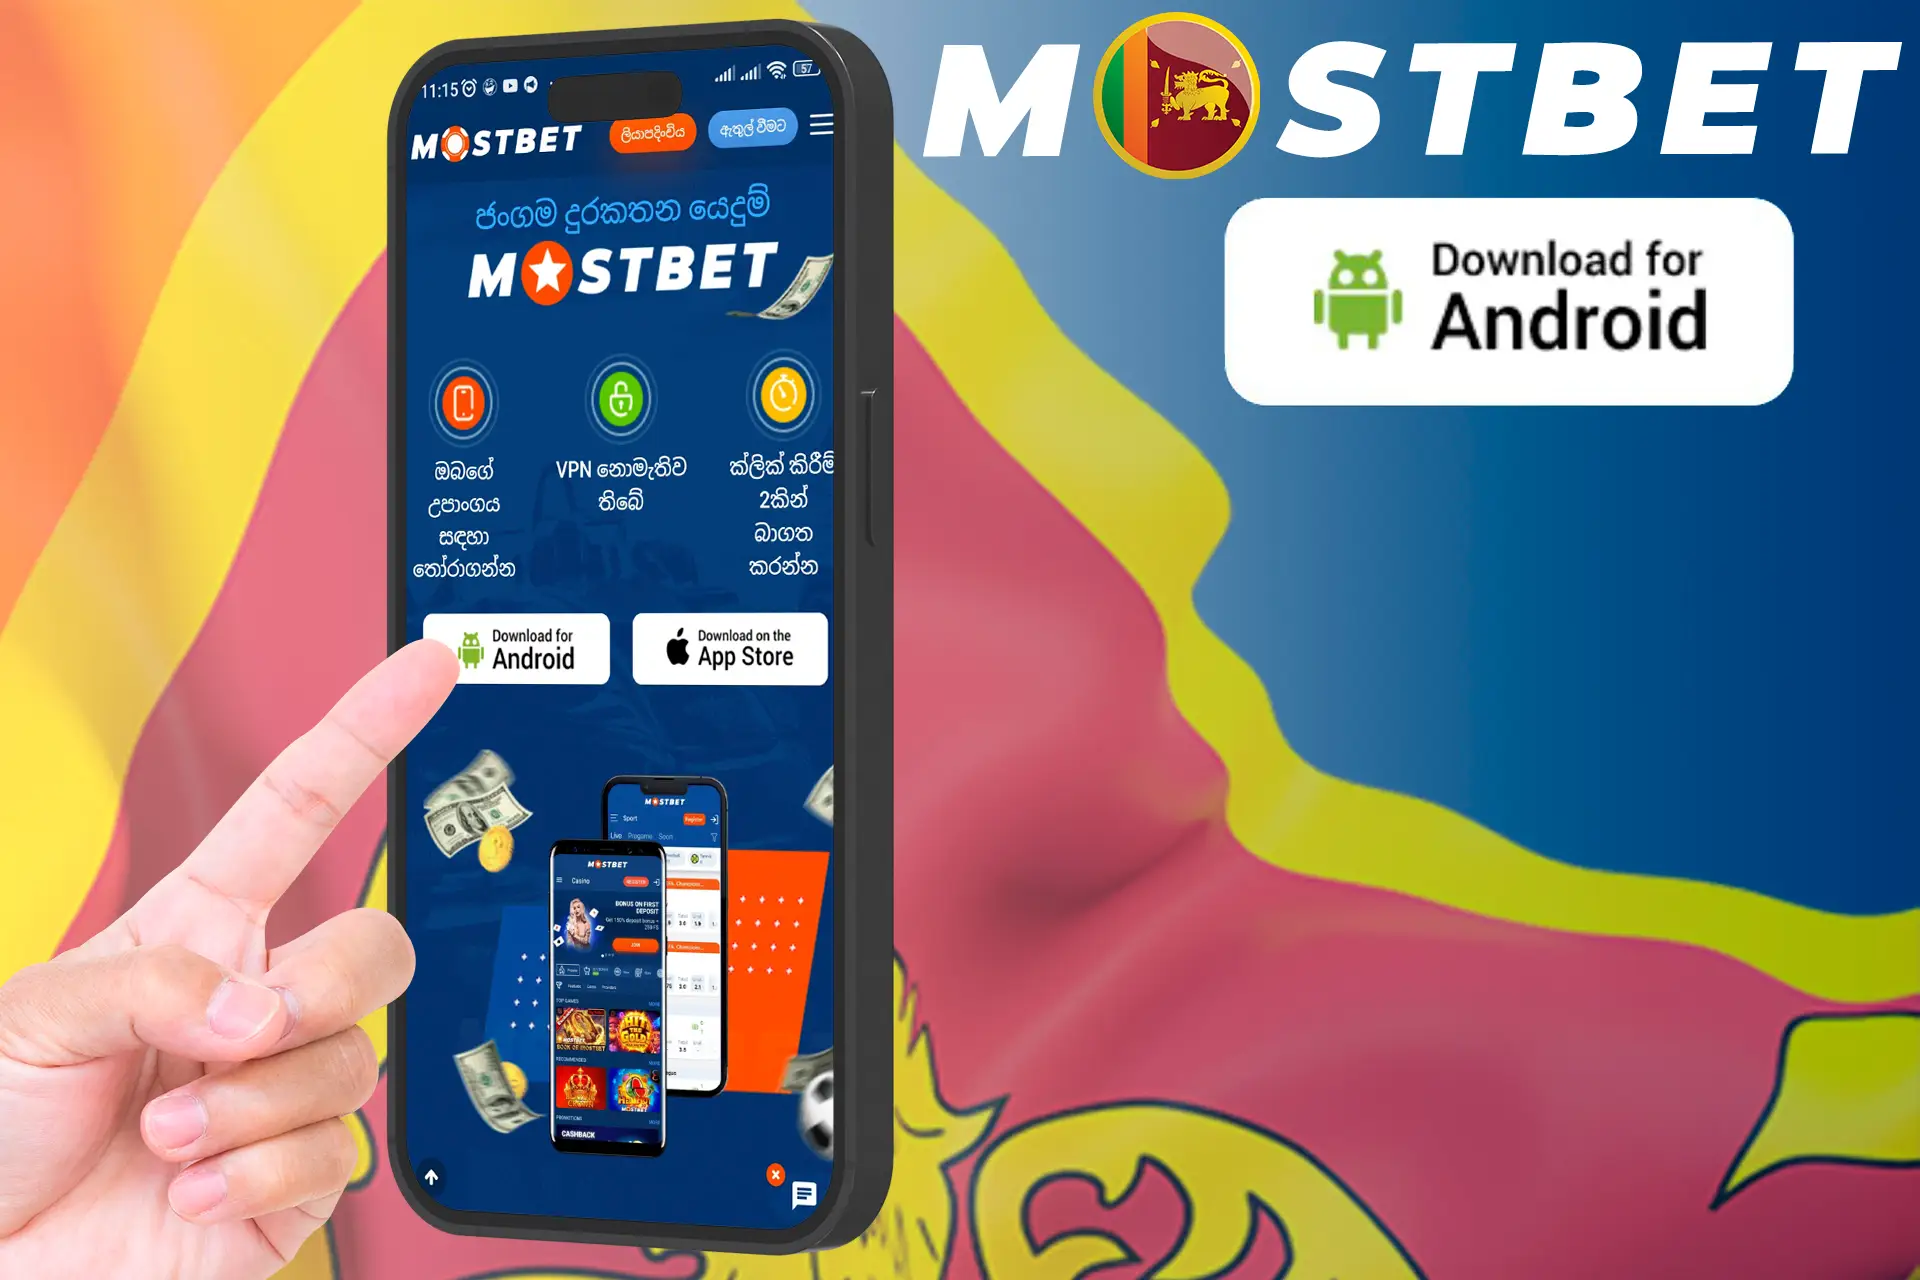 Download the mobile application from Mostbet Sri Lanka for Android